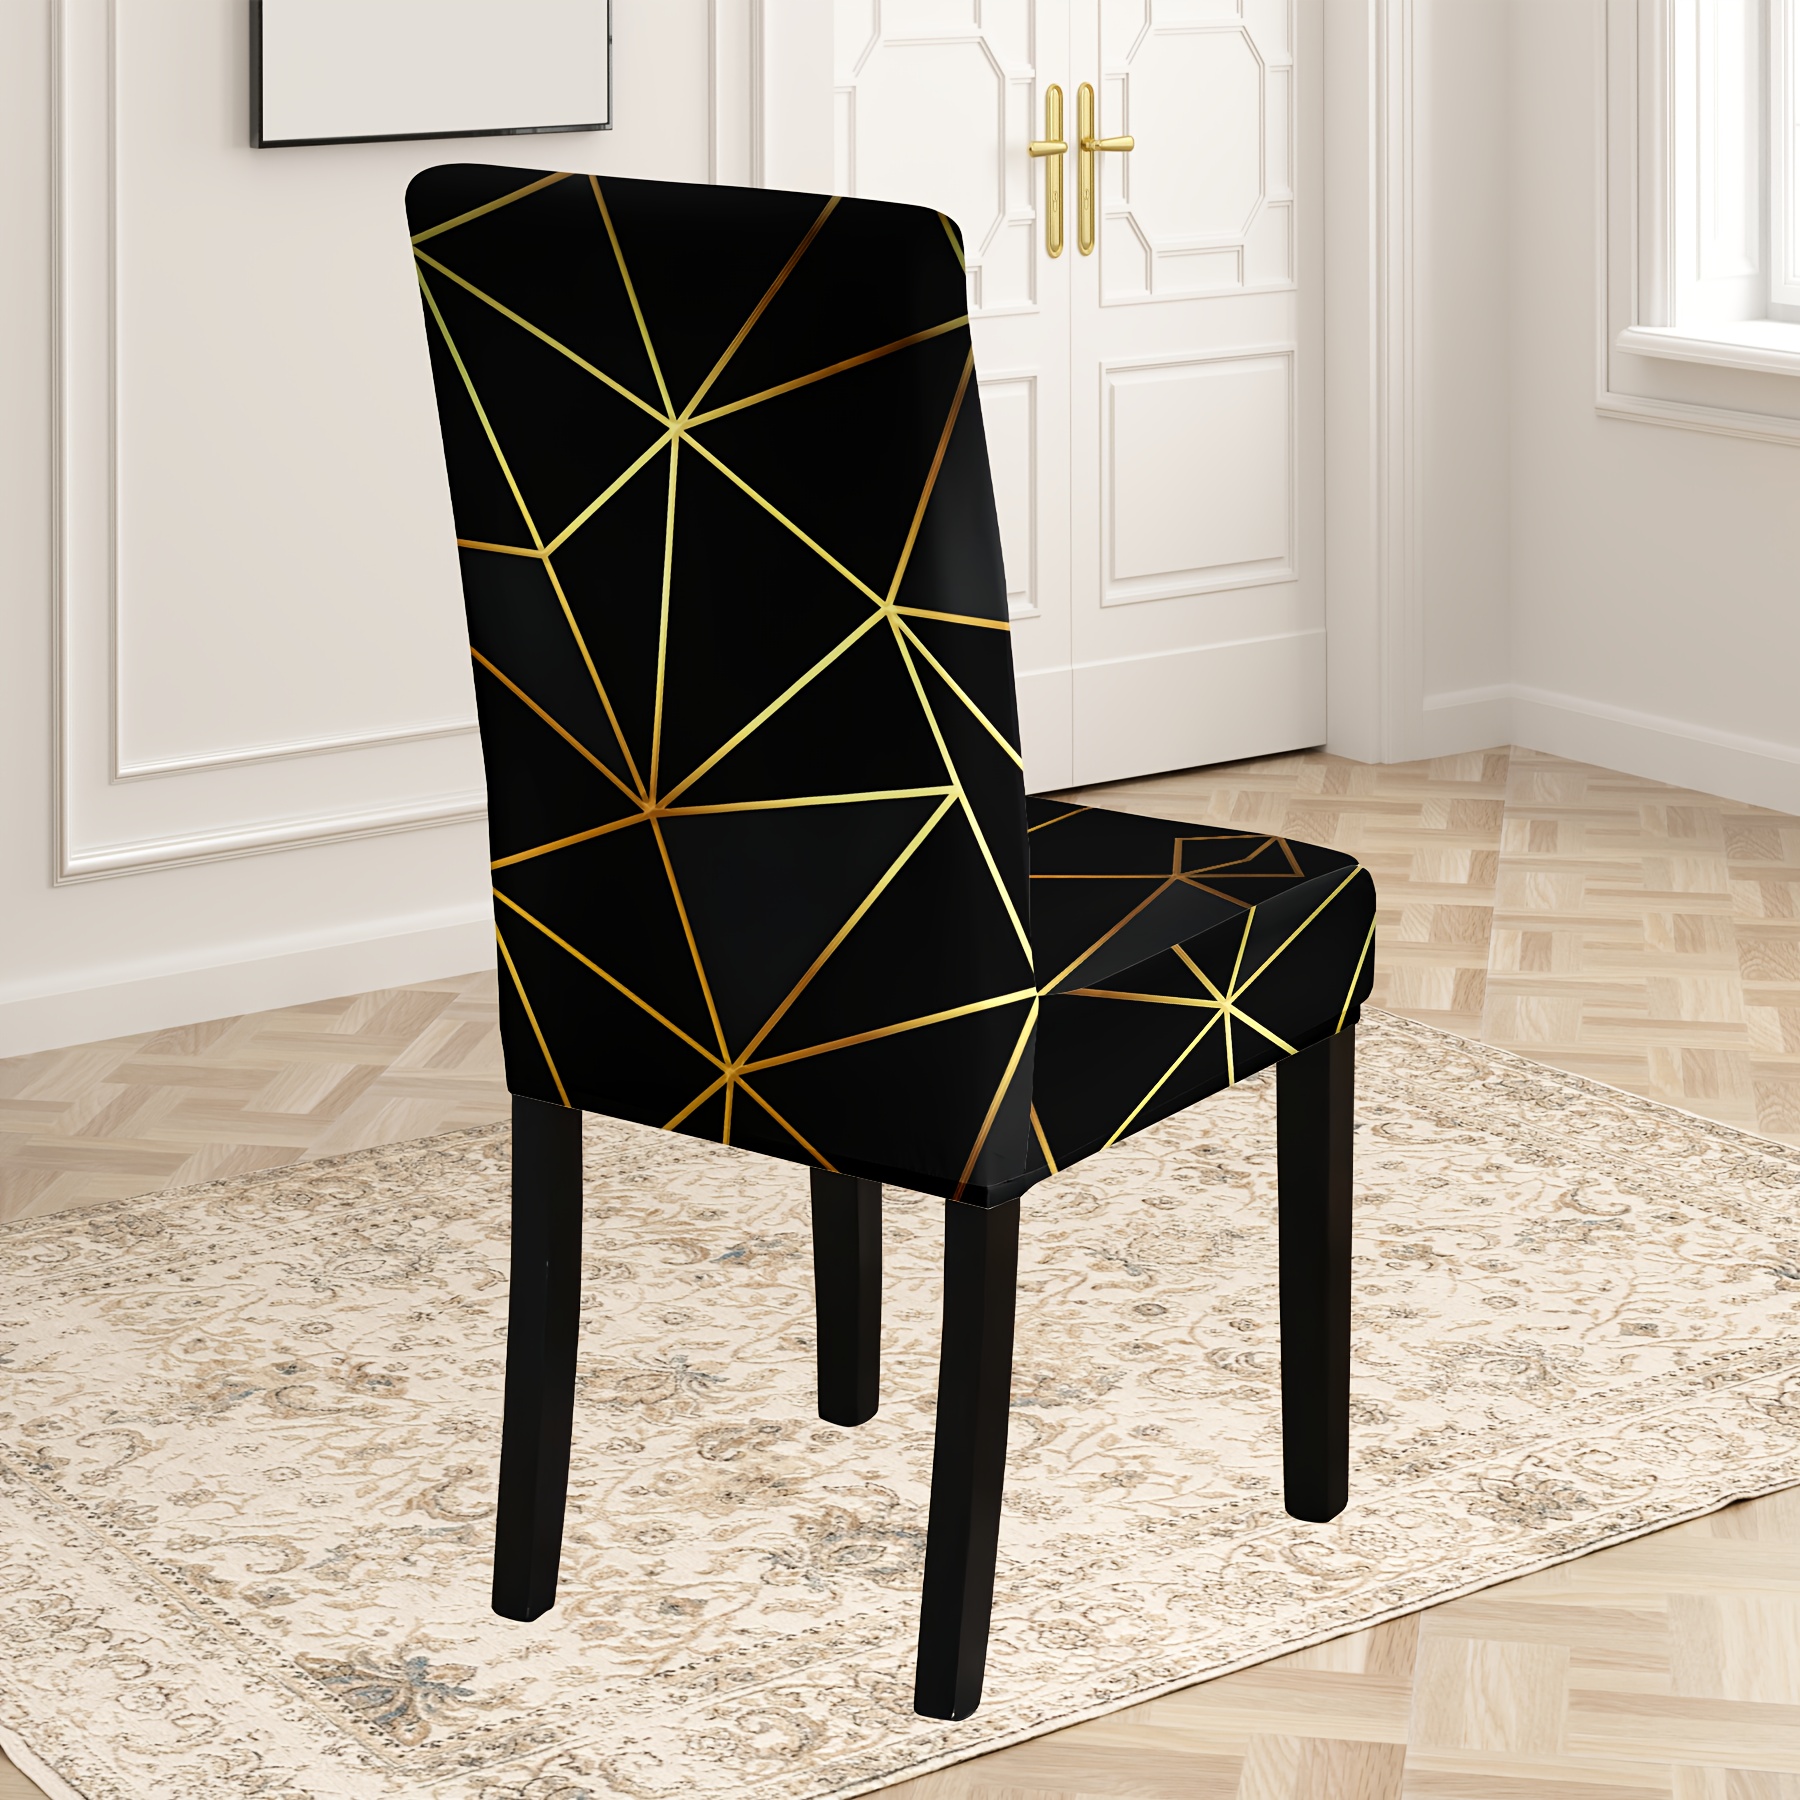 

4pcs/6pcs Geometric Gold Line Chair Covers - Suitable For Home, Hotel, And Garden Chairs - Durable, Easy To Clean, And High Elasticity